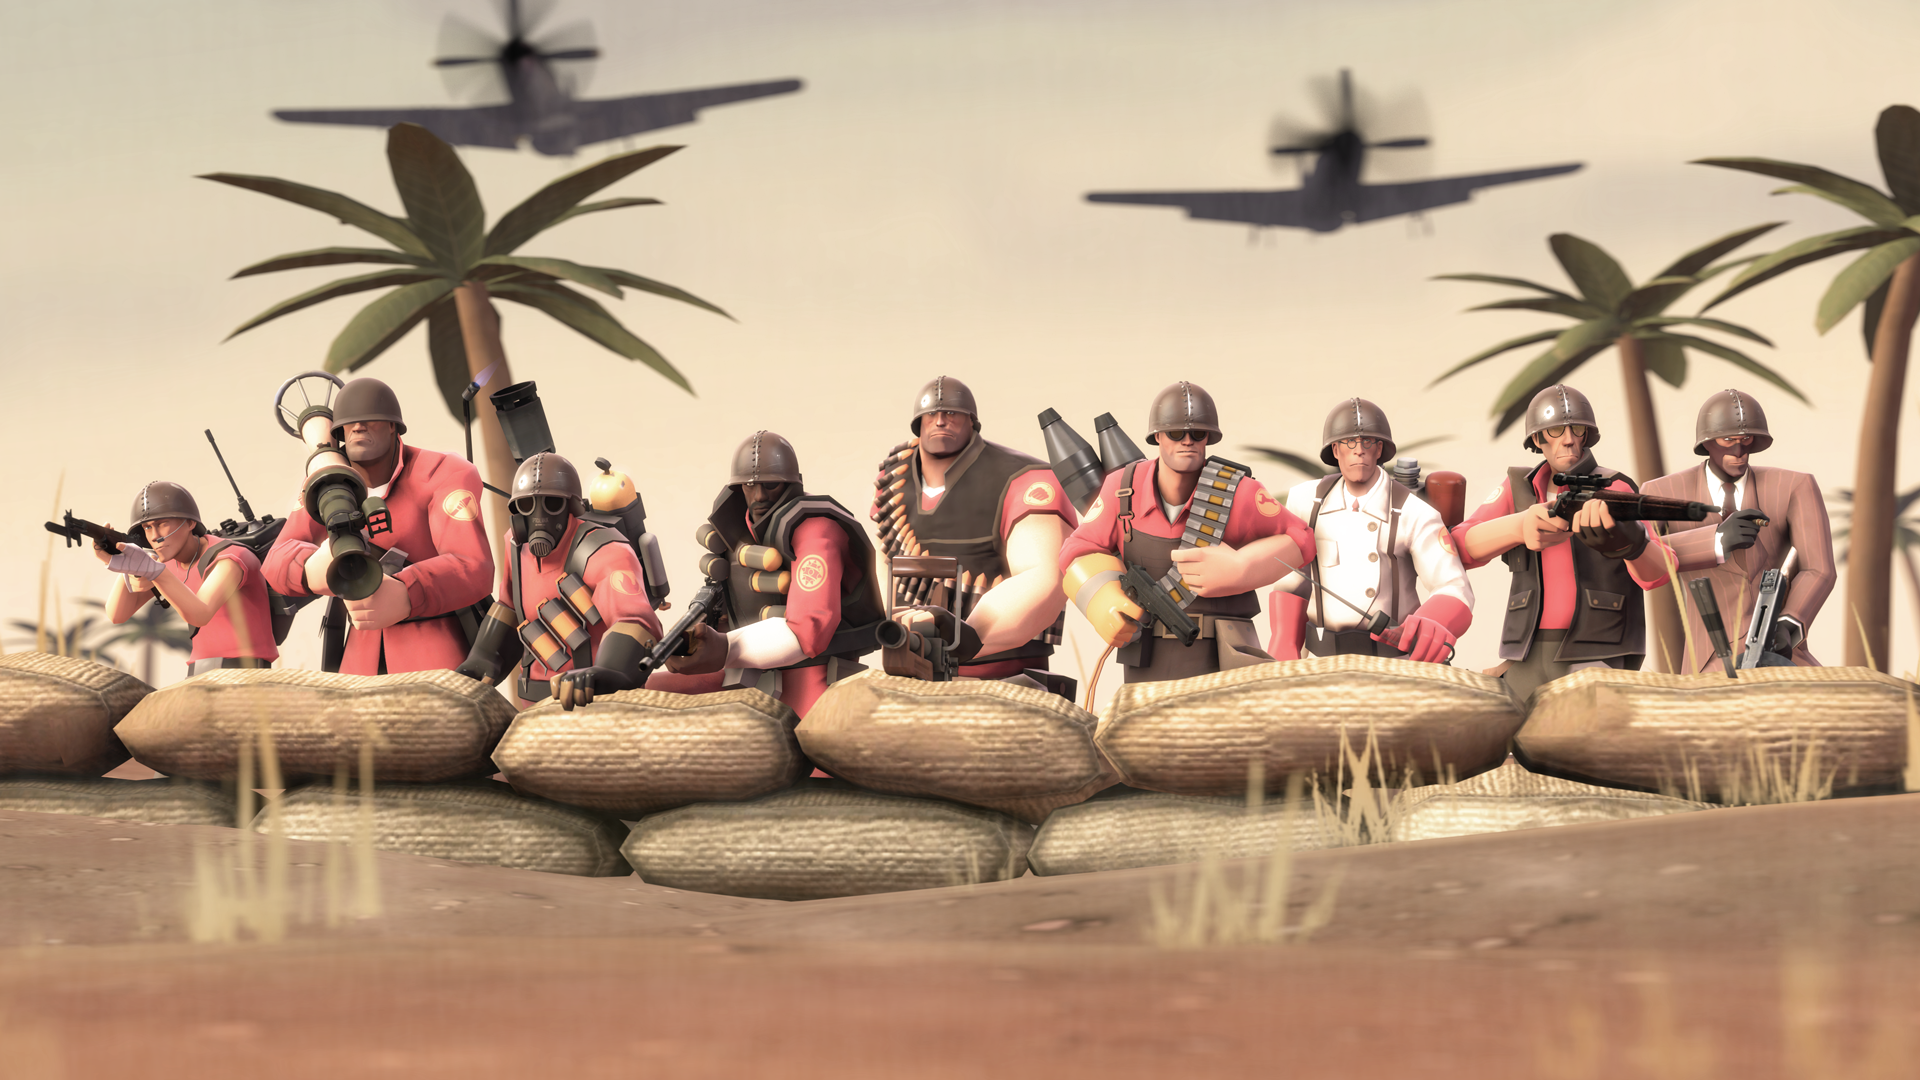 Team Fortress Loadout Wallpaper For